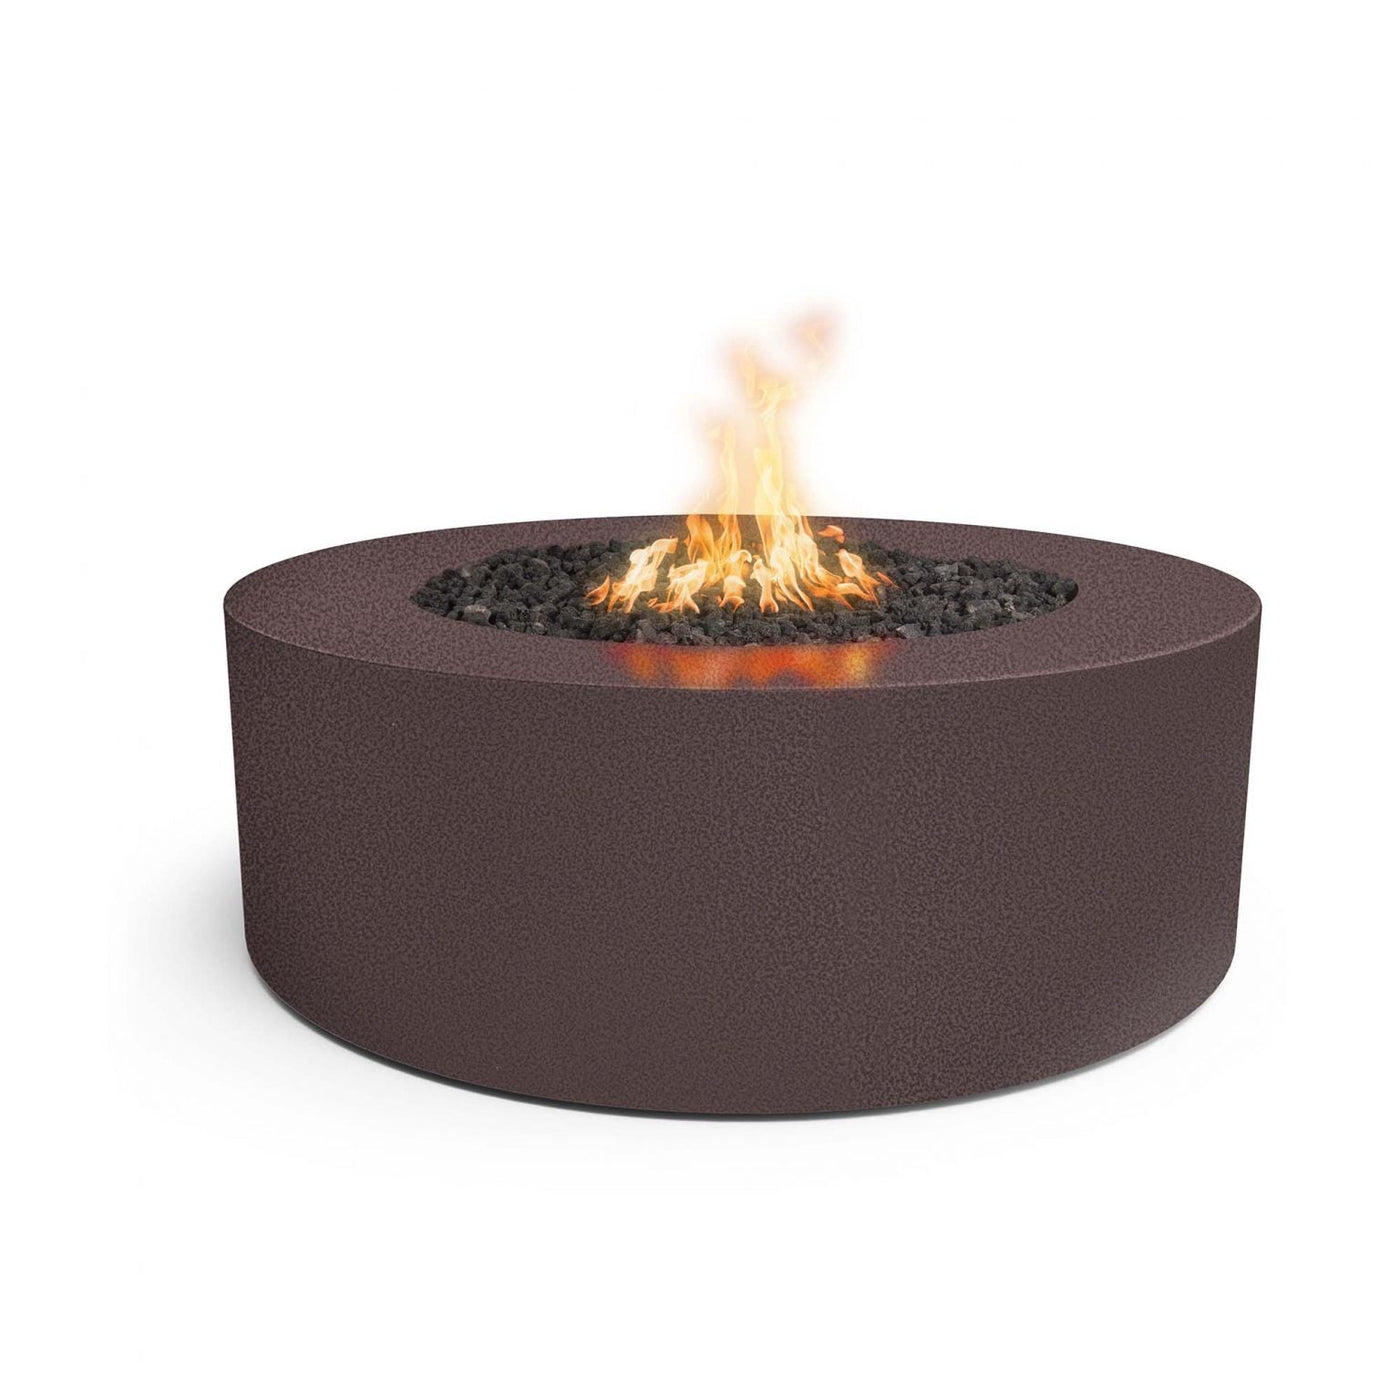 The Outdoor Plus 24" Tall Unity Powder Coated Steel Fire Pit